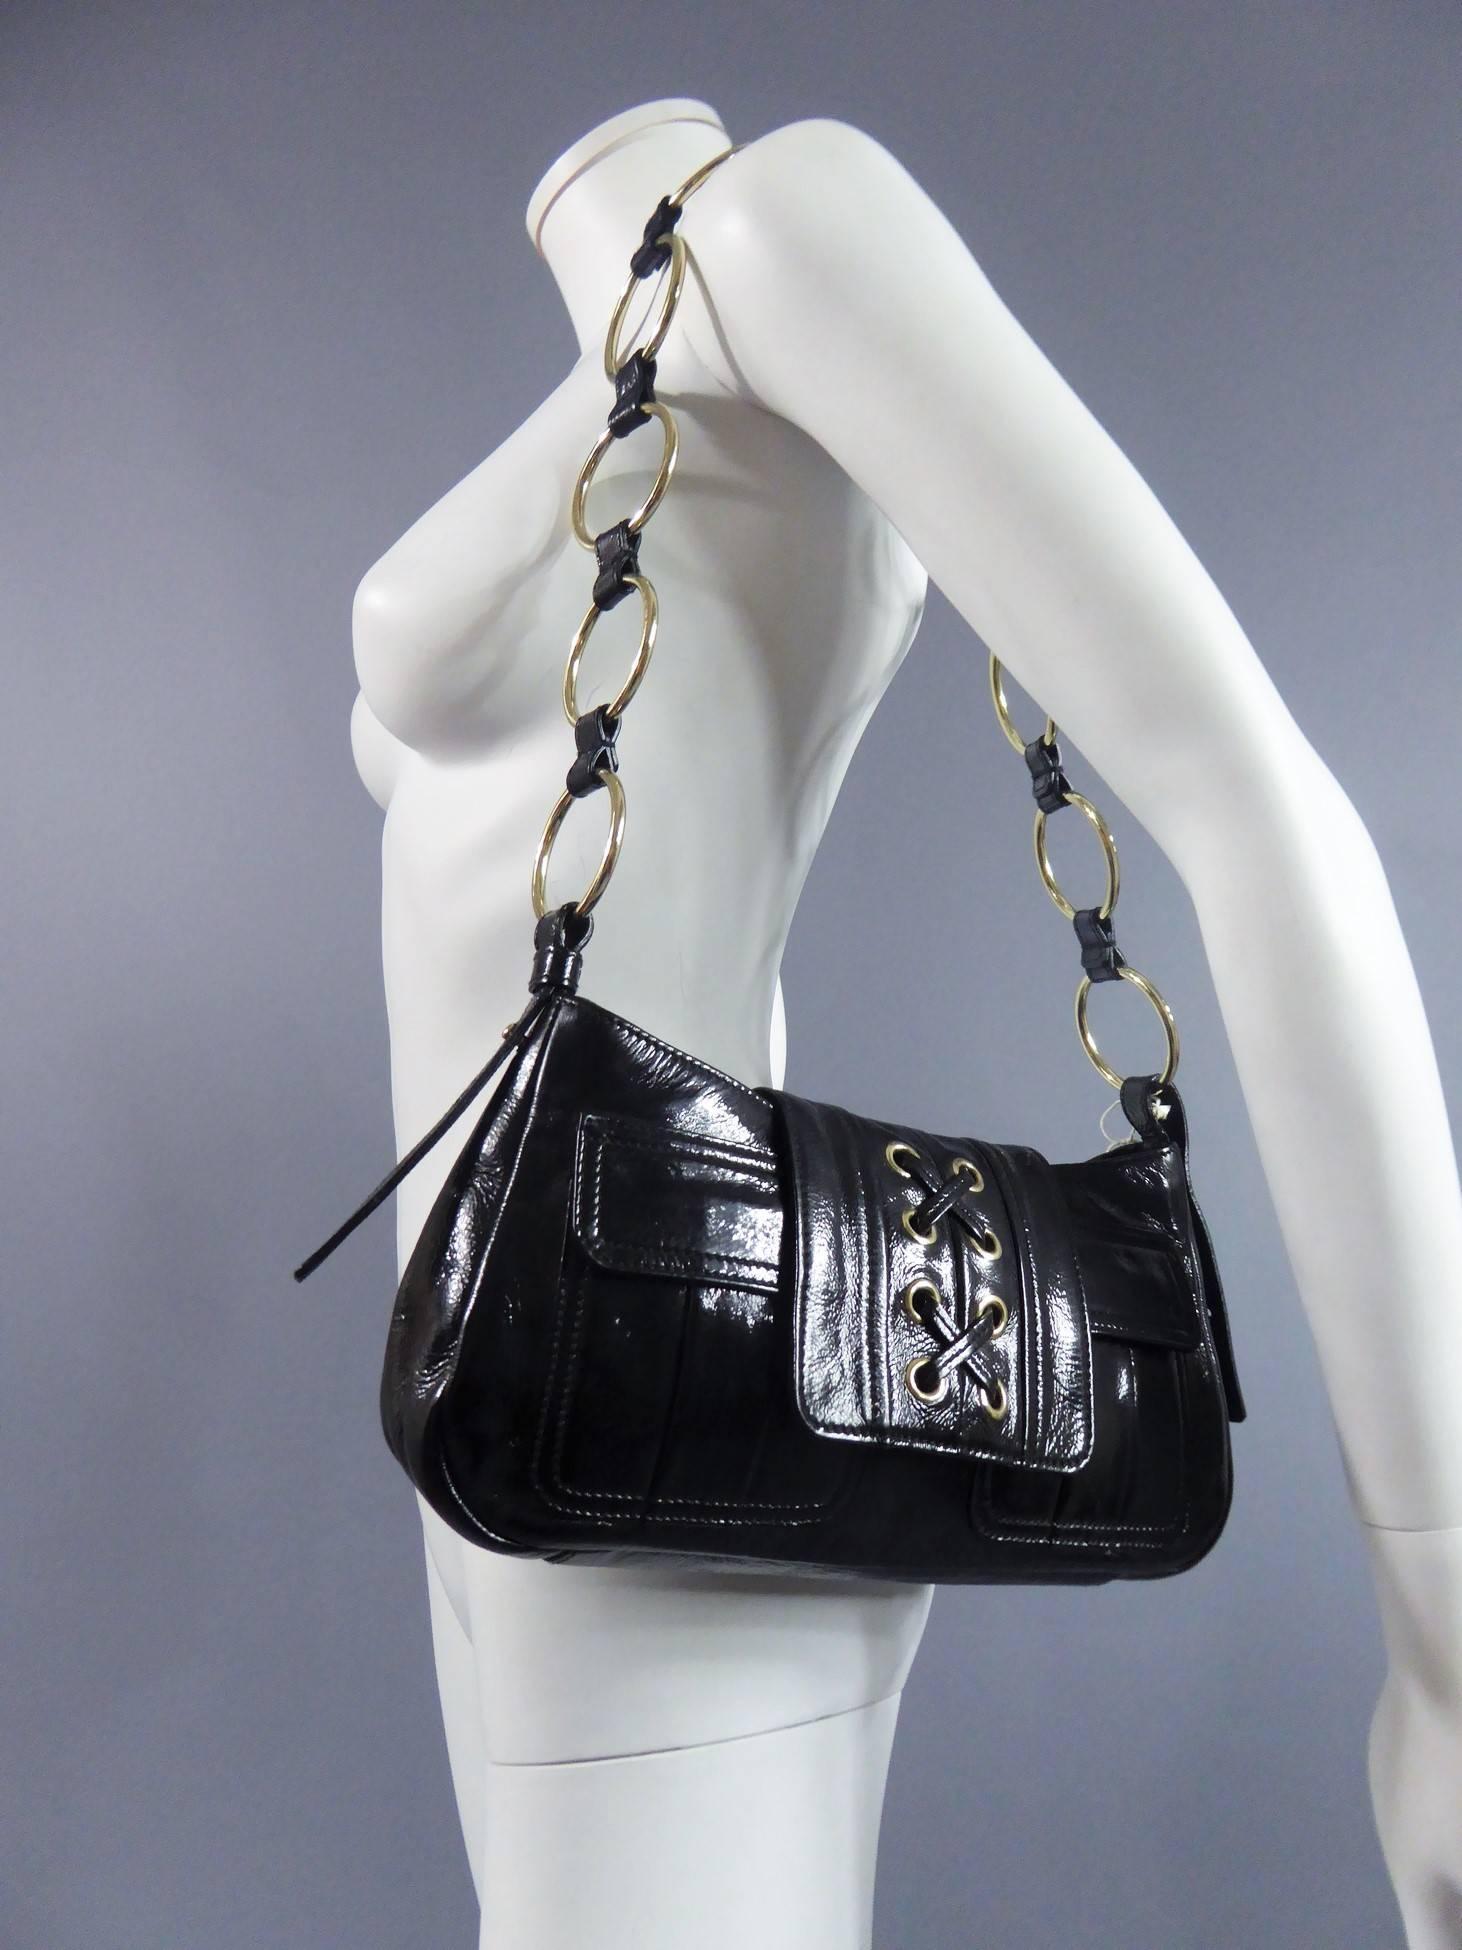 Circa 1980

France

Yves Saint Laurent Rive Gauche bag in black vinyl. Rectangular format. Opening with flap and metallic insivisible golden clip. Flap closure inspired by the iconic Saharan jacket of the couturier with eight rivets of gold metal